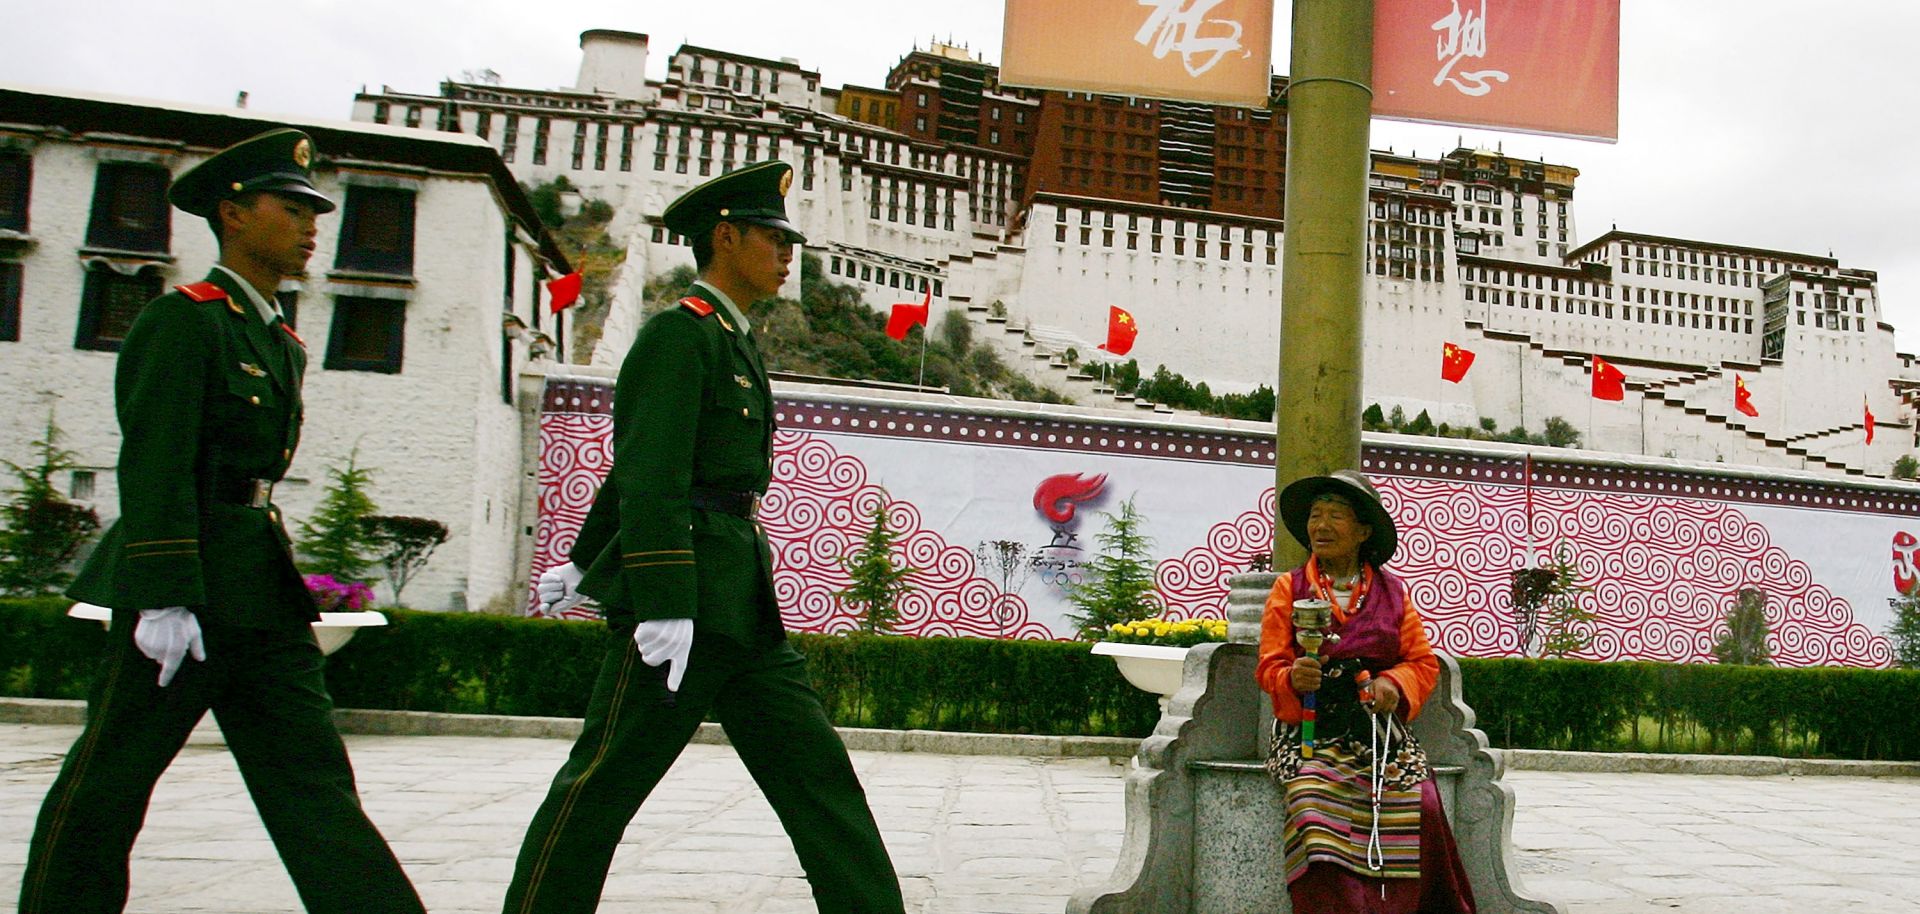 A Tibetan worshiper looks at Chinese police officer patrolling in front of Potala Palace in Lhasa, Tibet.